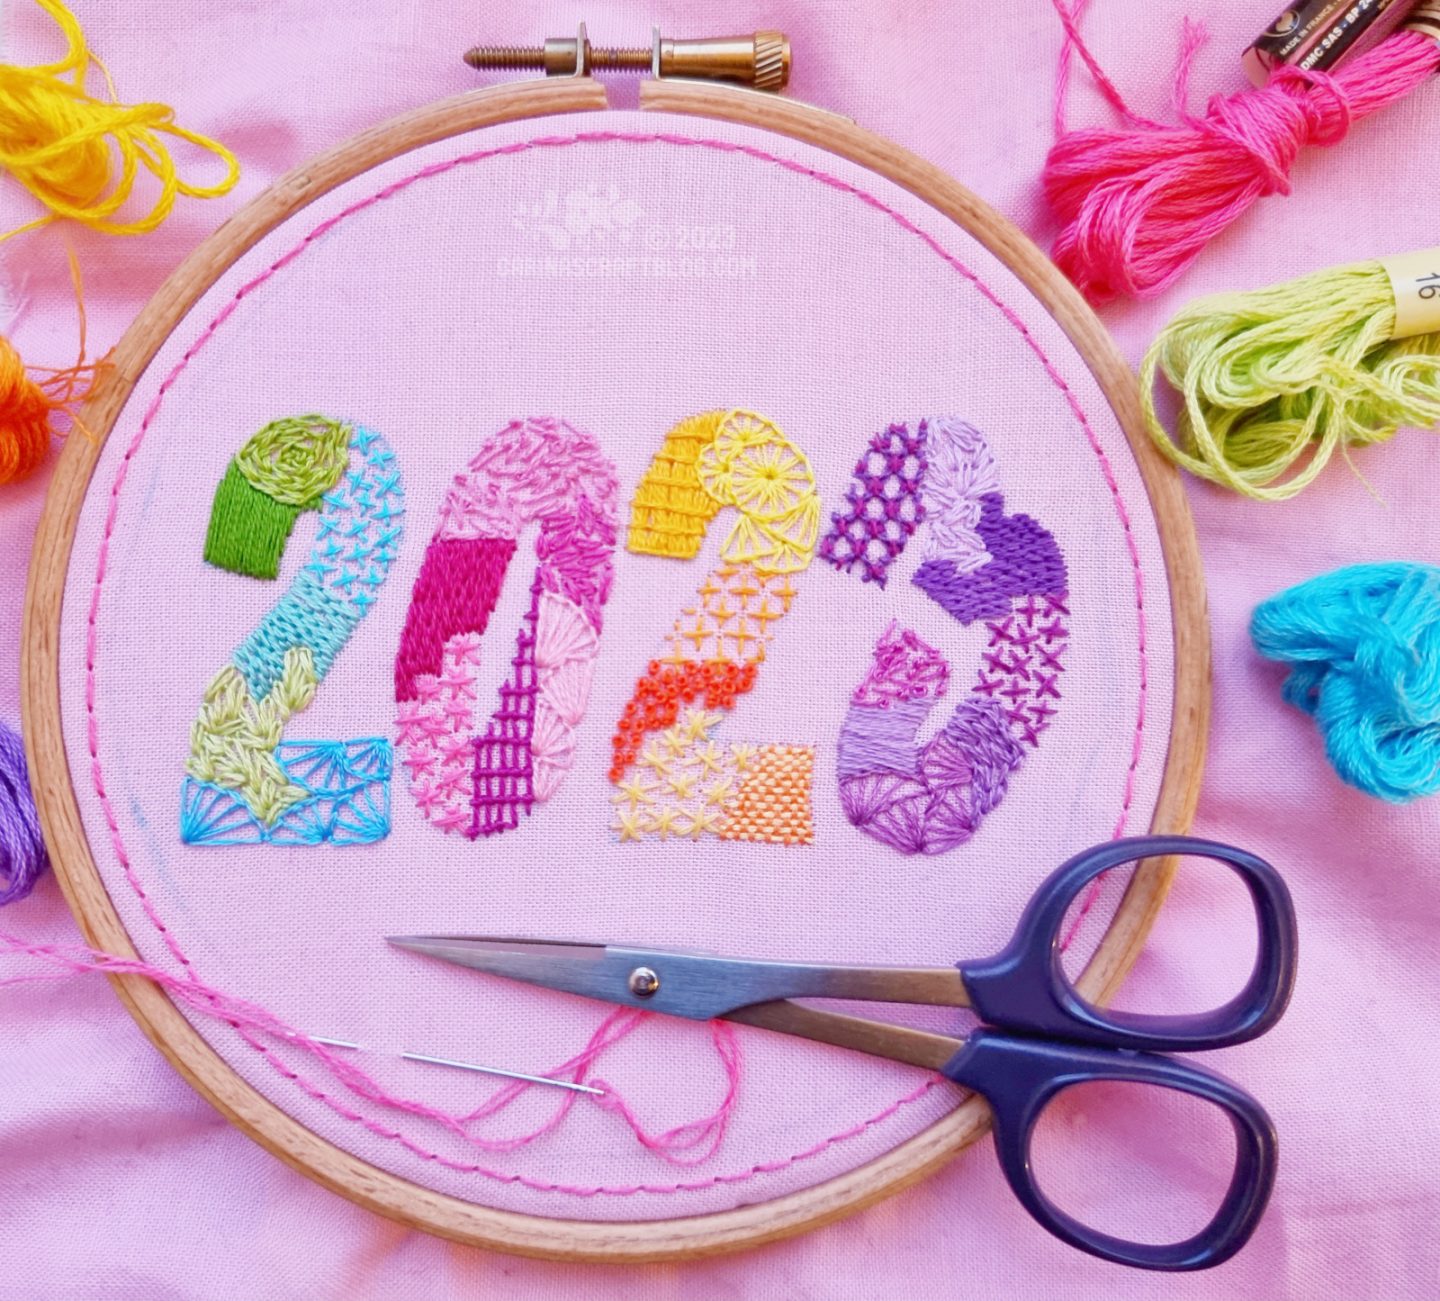 Light pink fabric in a wooden embroidery hoop. On the fabric is embroidered the number 2023 using many different stitches and colours.